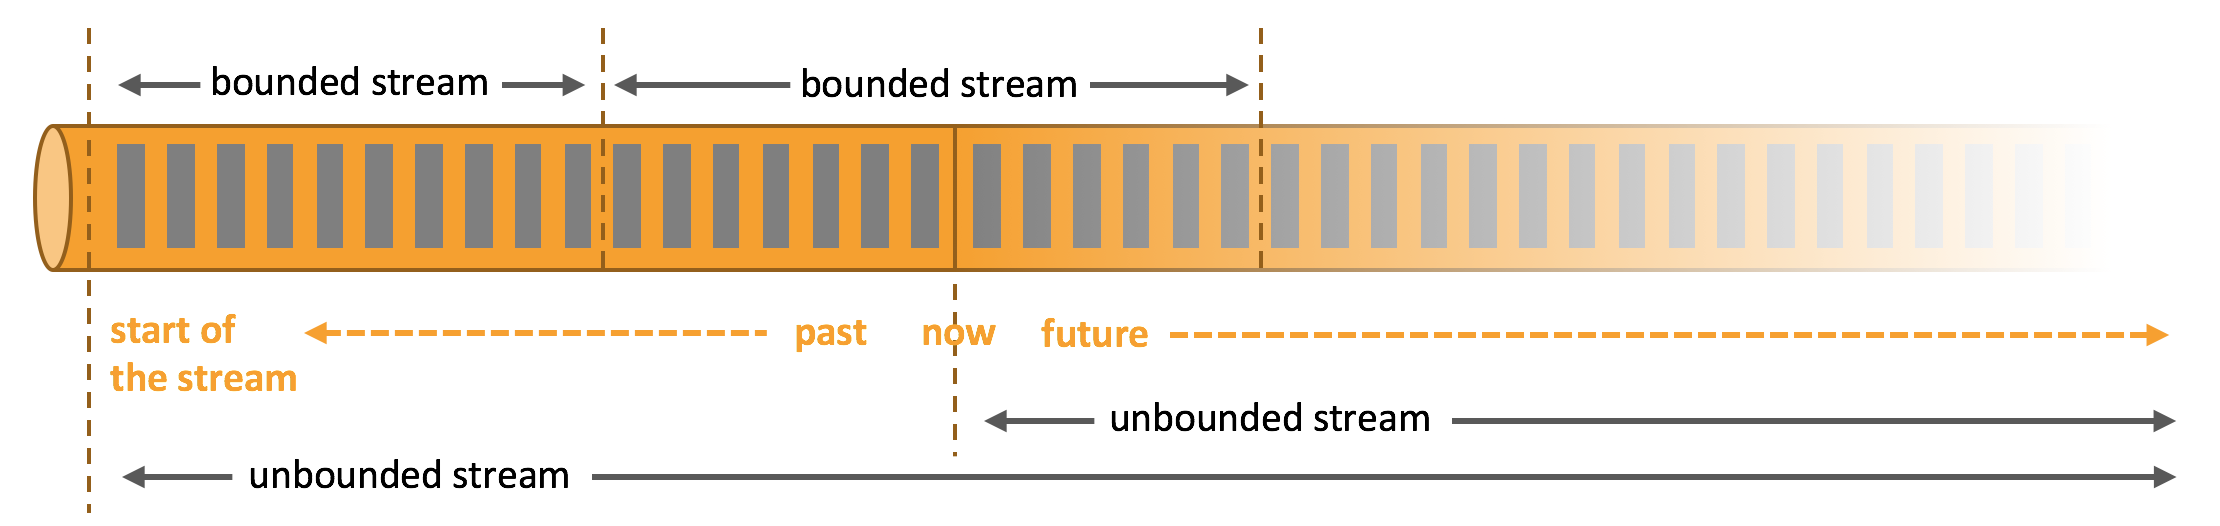 Bounded and unbounded streams